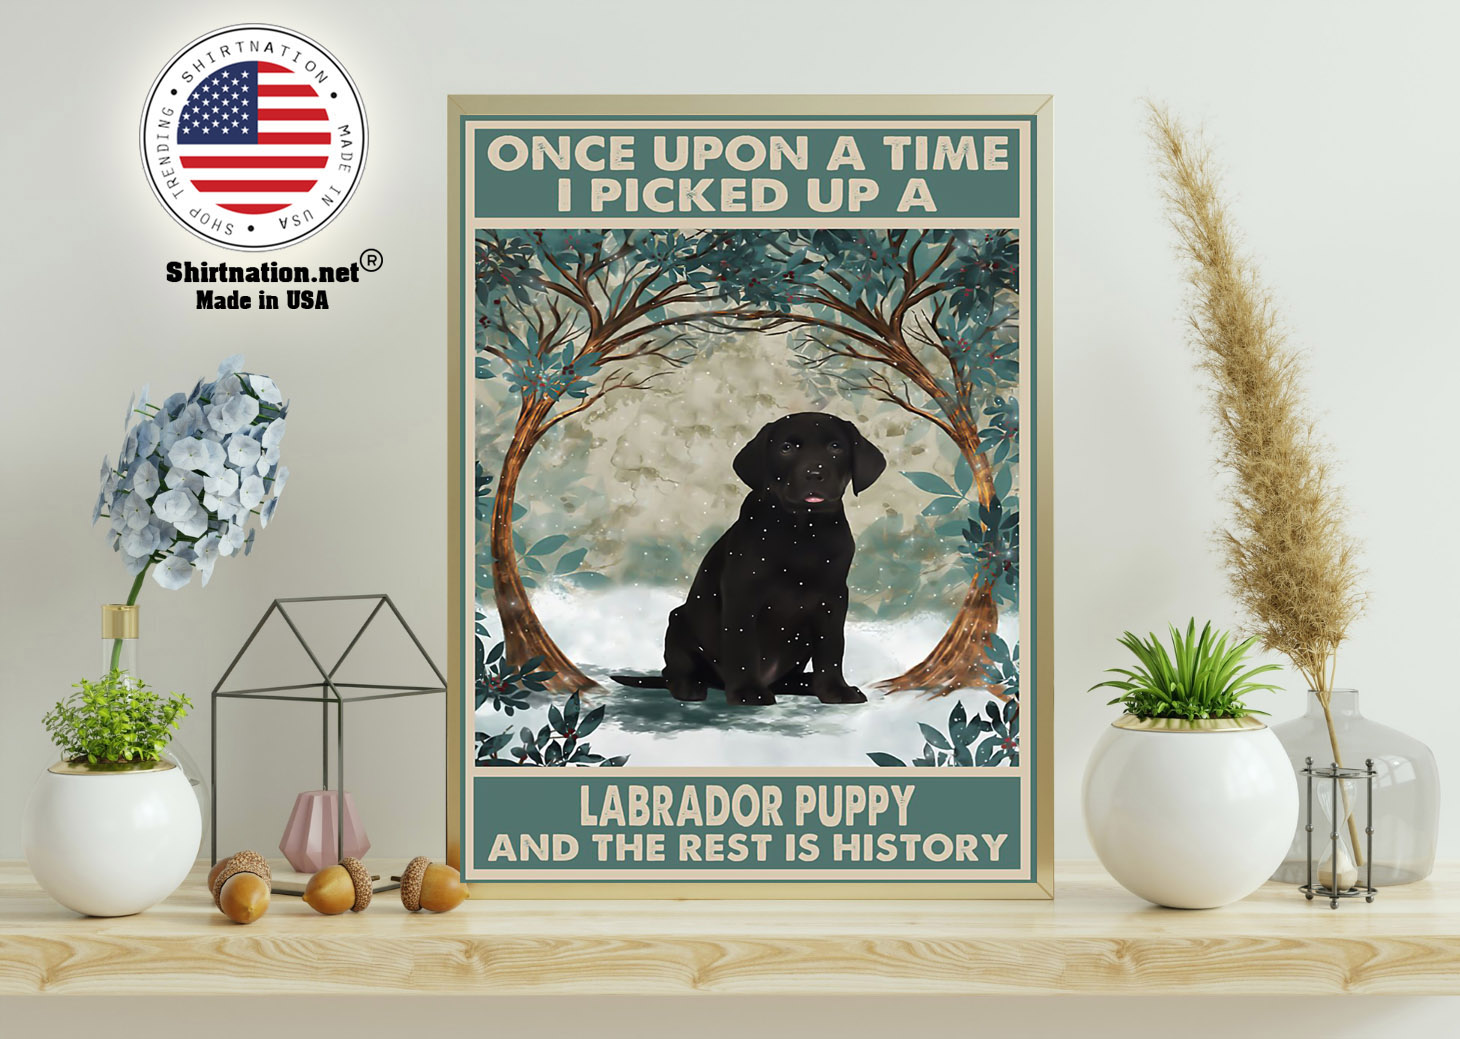 Once upon a time I picked up a labrador puppy and the rest is history poster 11